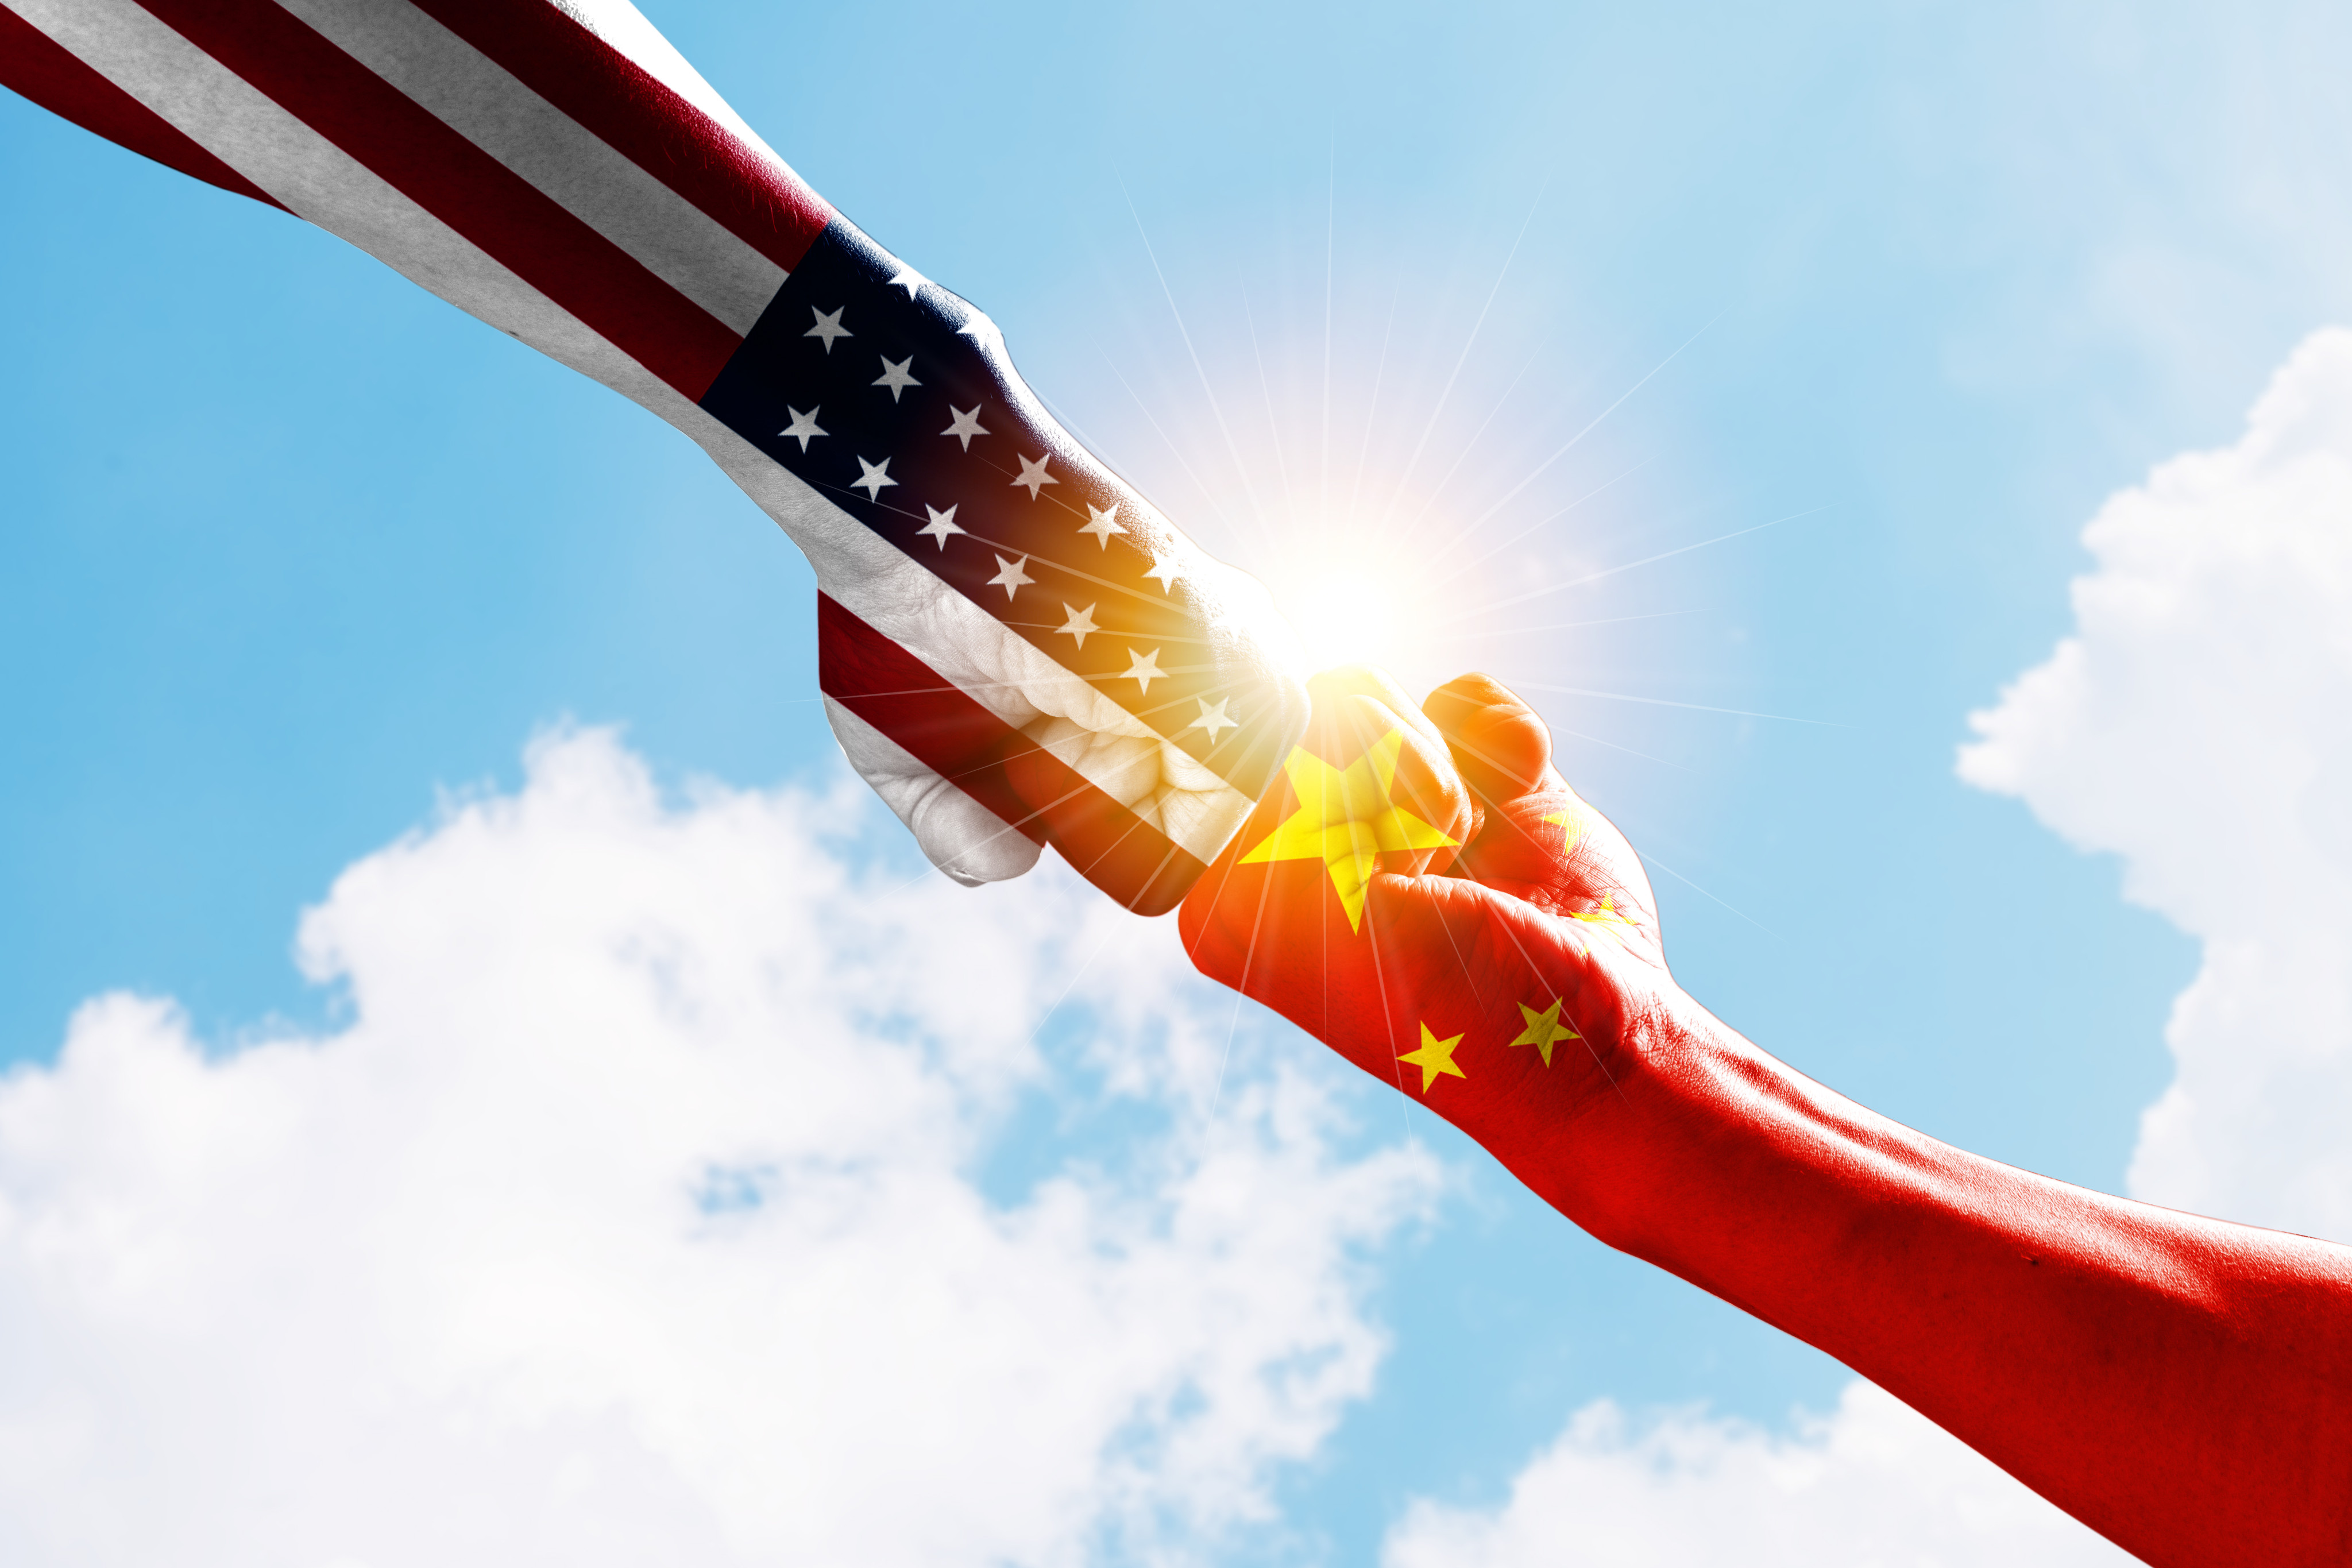 The United States has been looking into ways to regulate its cloud computing industry via export controls, following sweeping restrictions that limit China’s access to advanced semiconductors. Image: Shutterstock